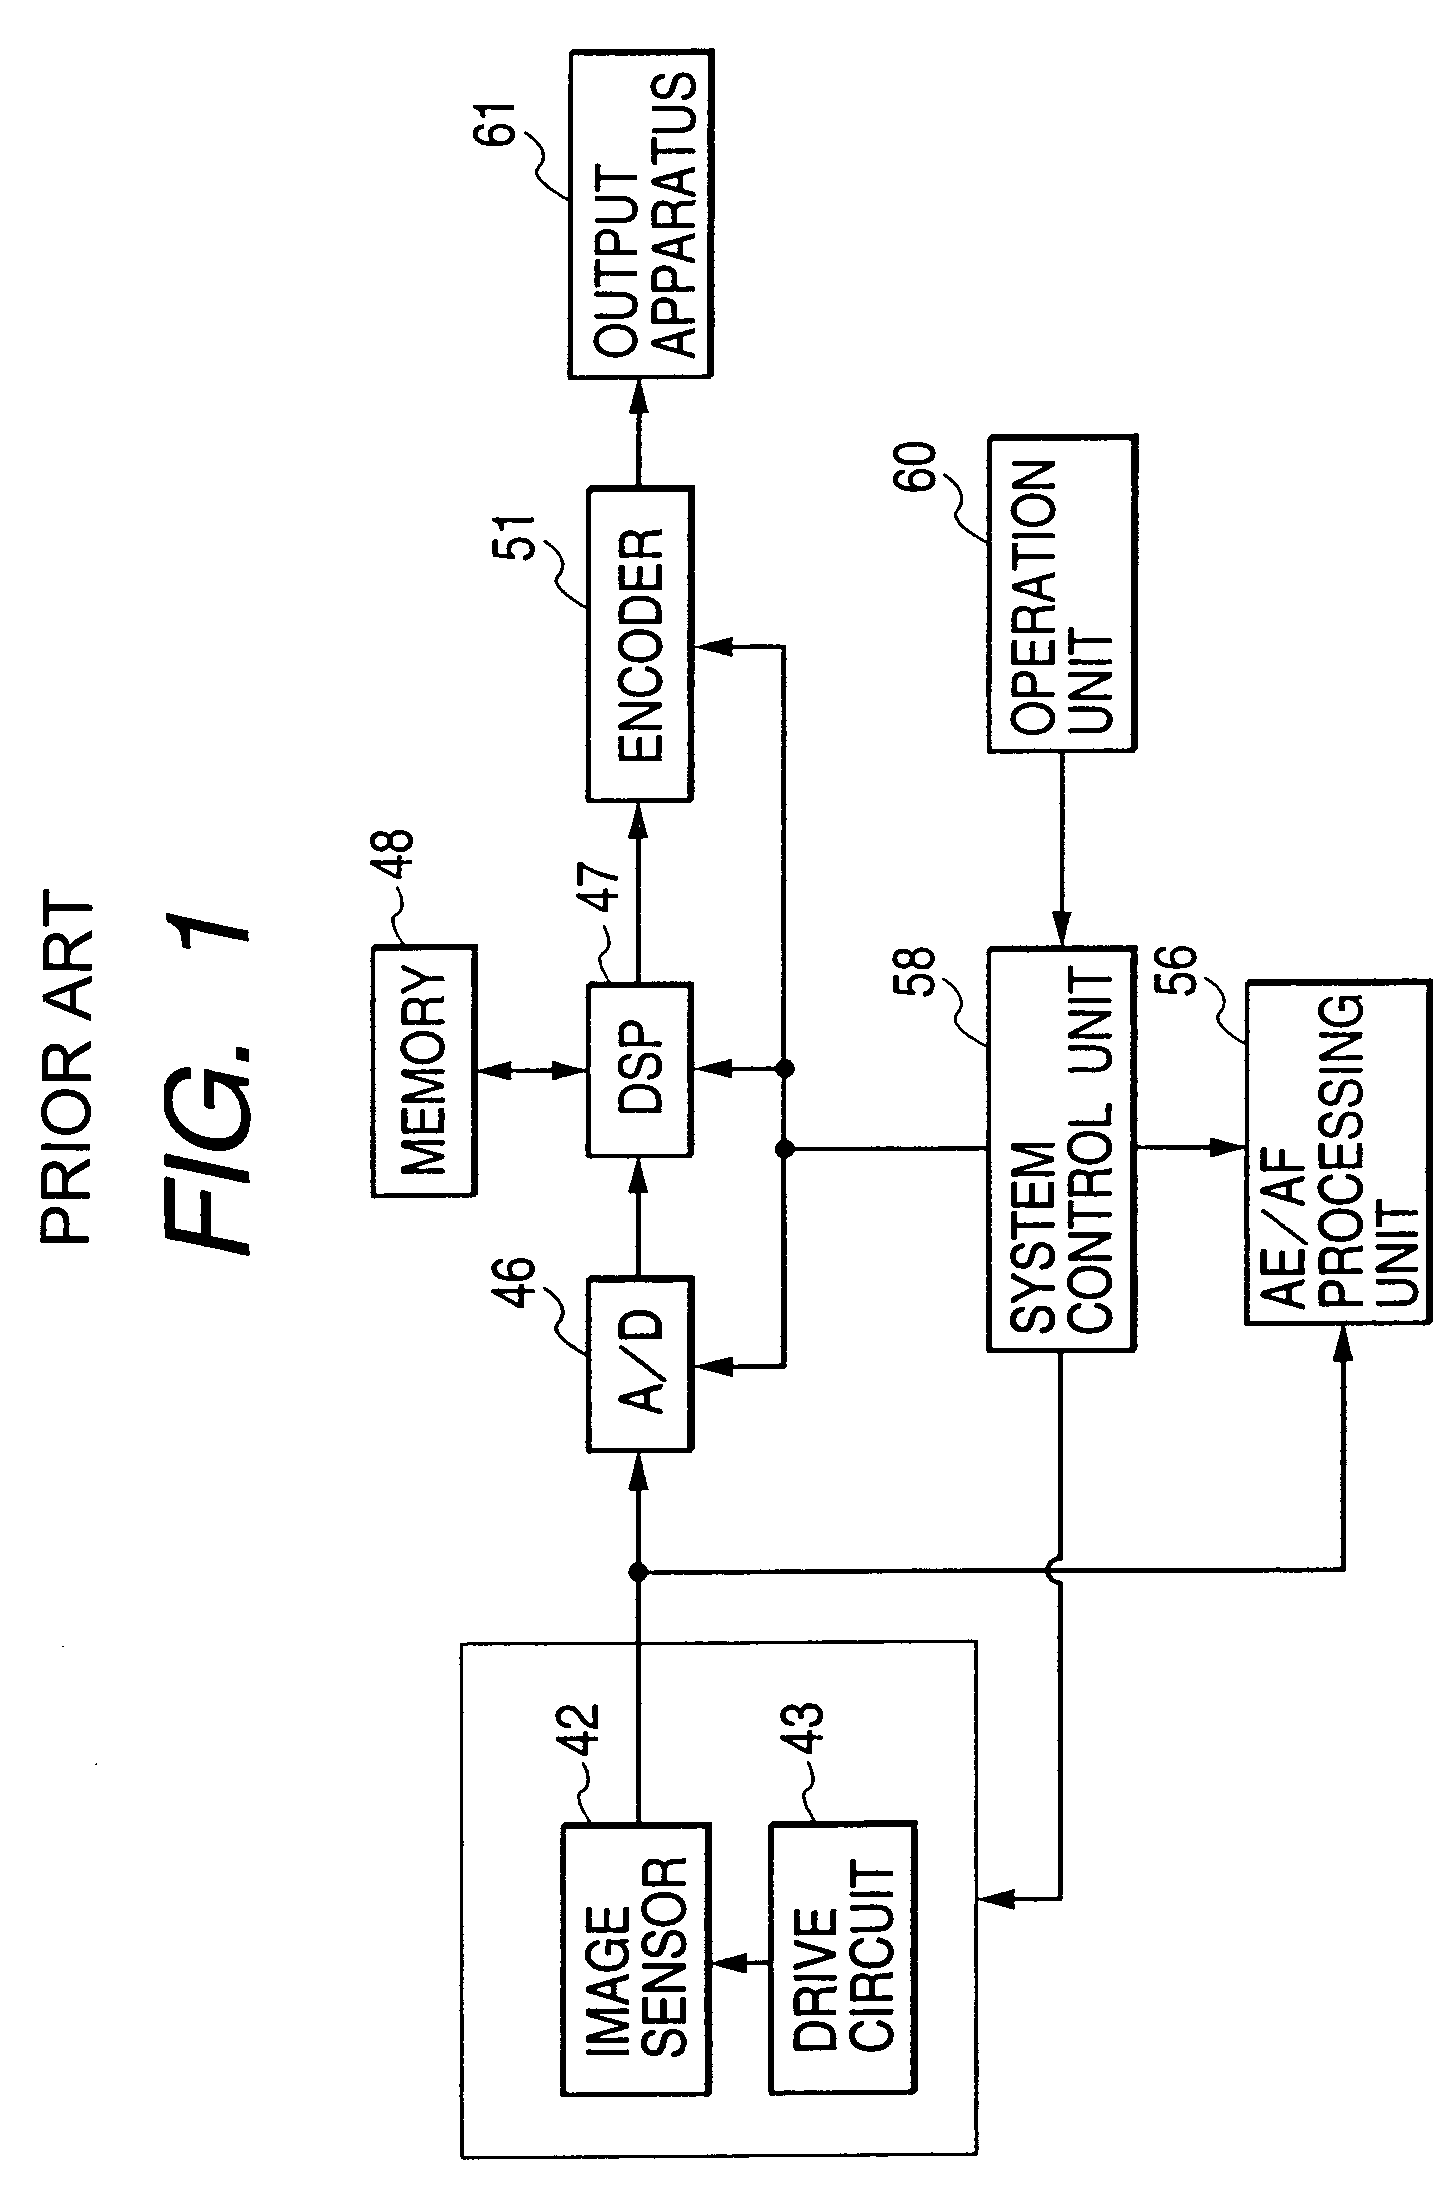 Image sensing apparatus arranged on a single substrate